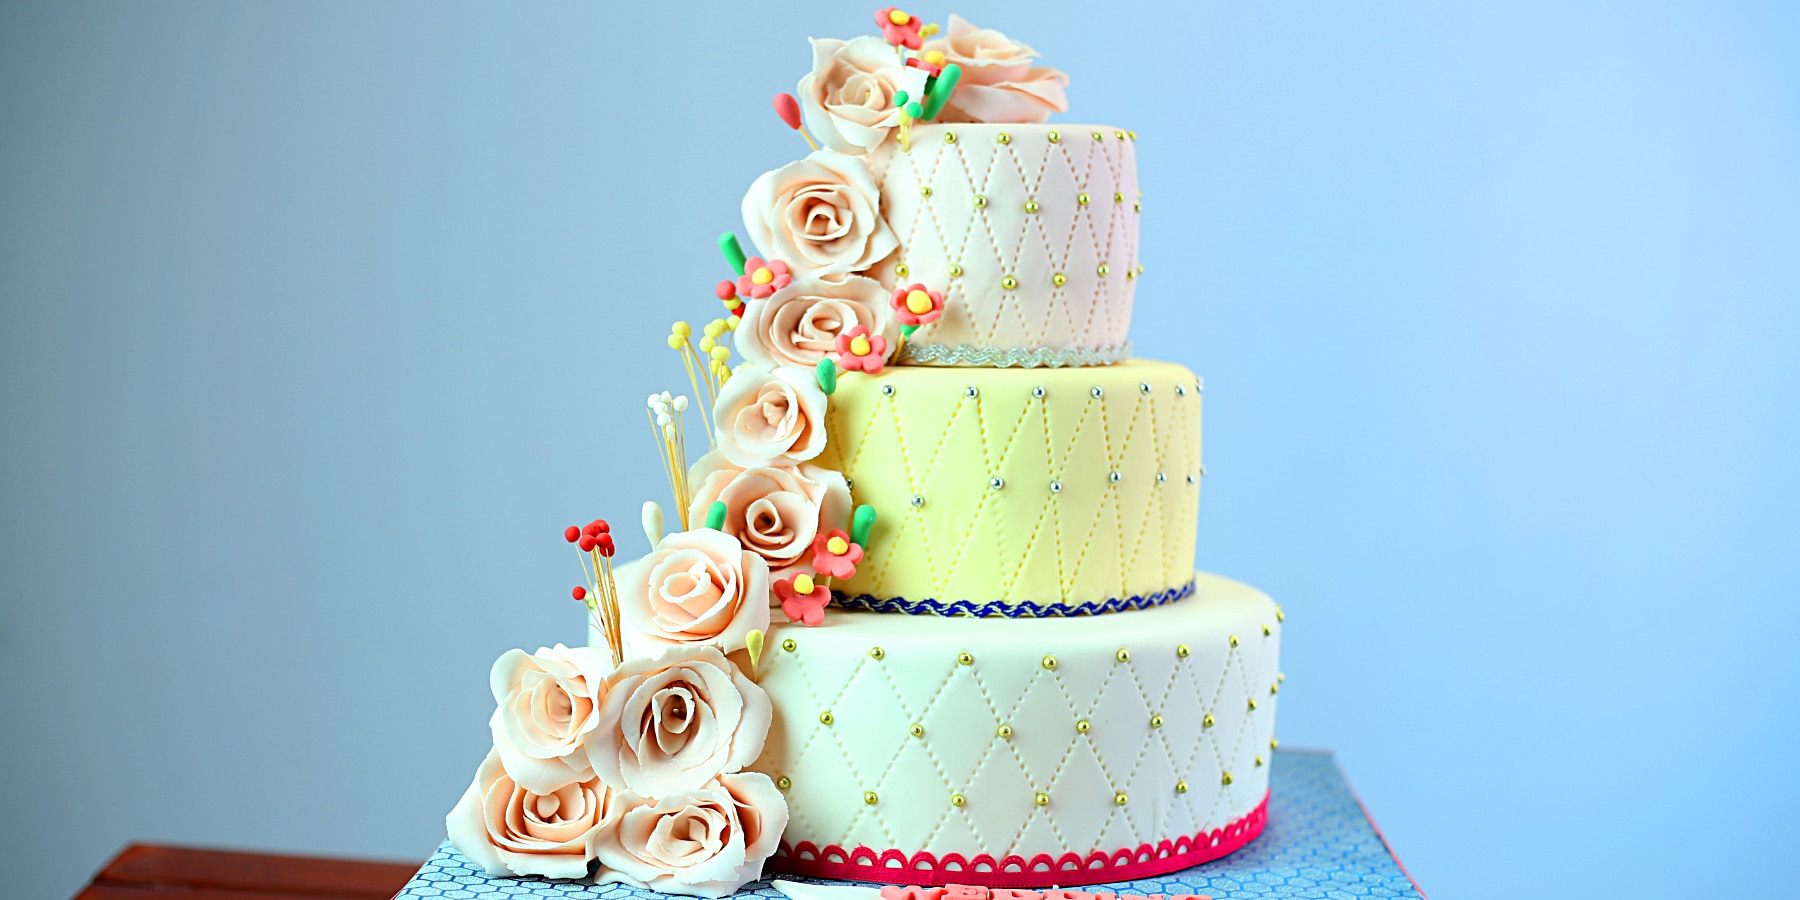 Three tiered wedding cake in yellow and green with a cascade of roses.